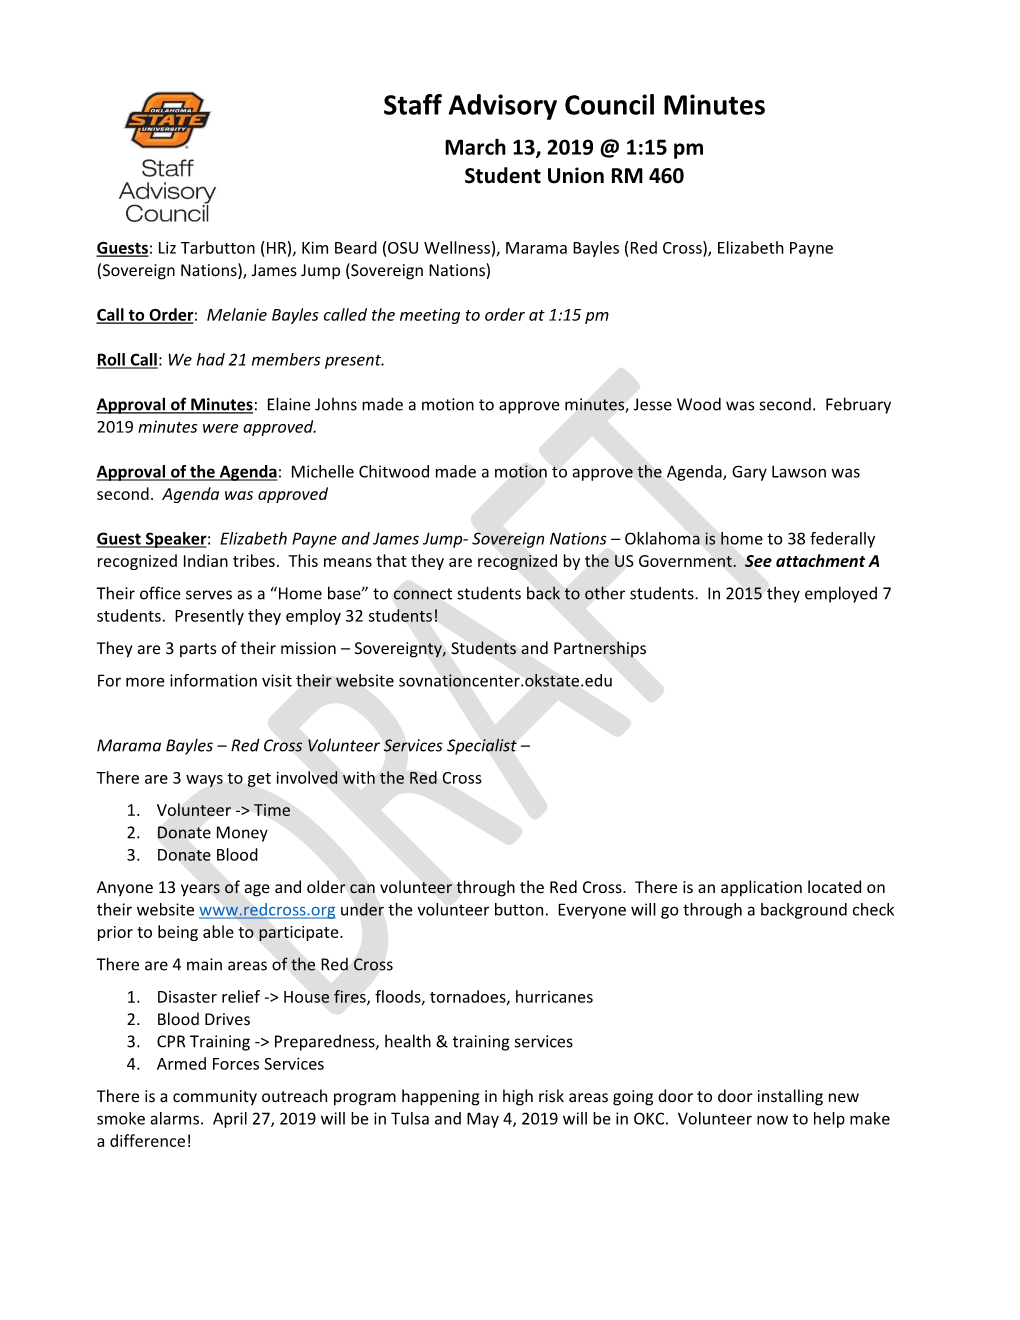 Staff Advisory Council Minutes March 13, 2019 @ 1:15 Pm Student Union RM 460